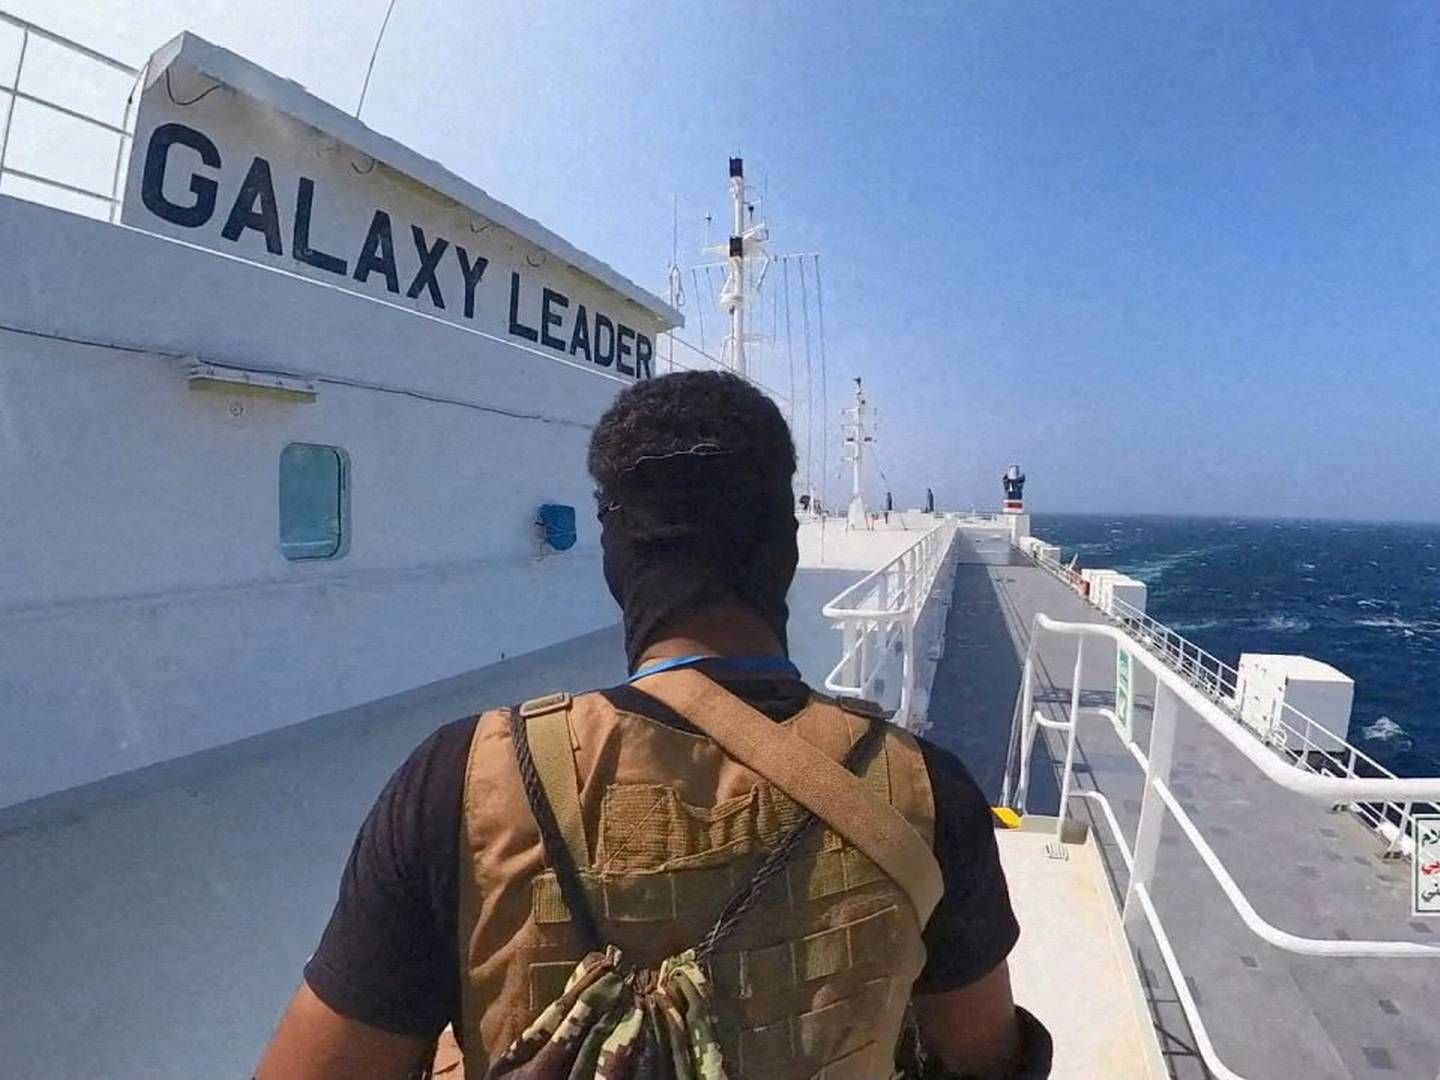 The Galaxy Leader was boarded by Houthi rebels in one of the first attacks on Red Sea vessels.